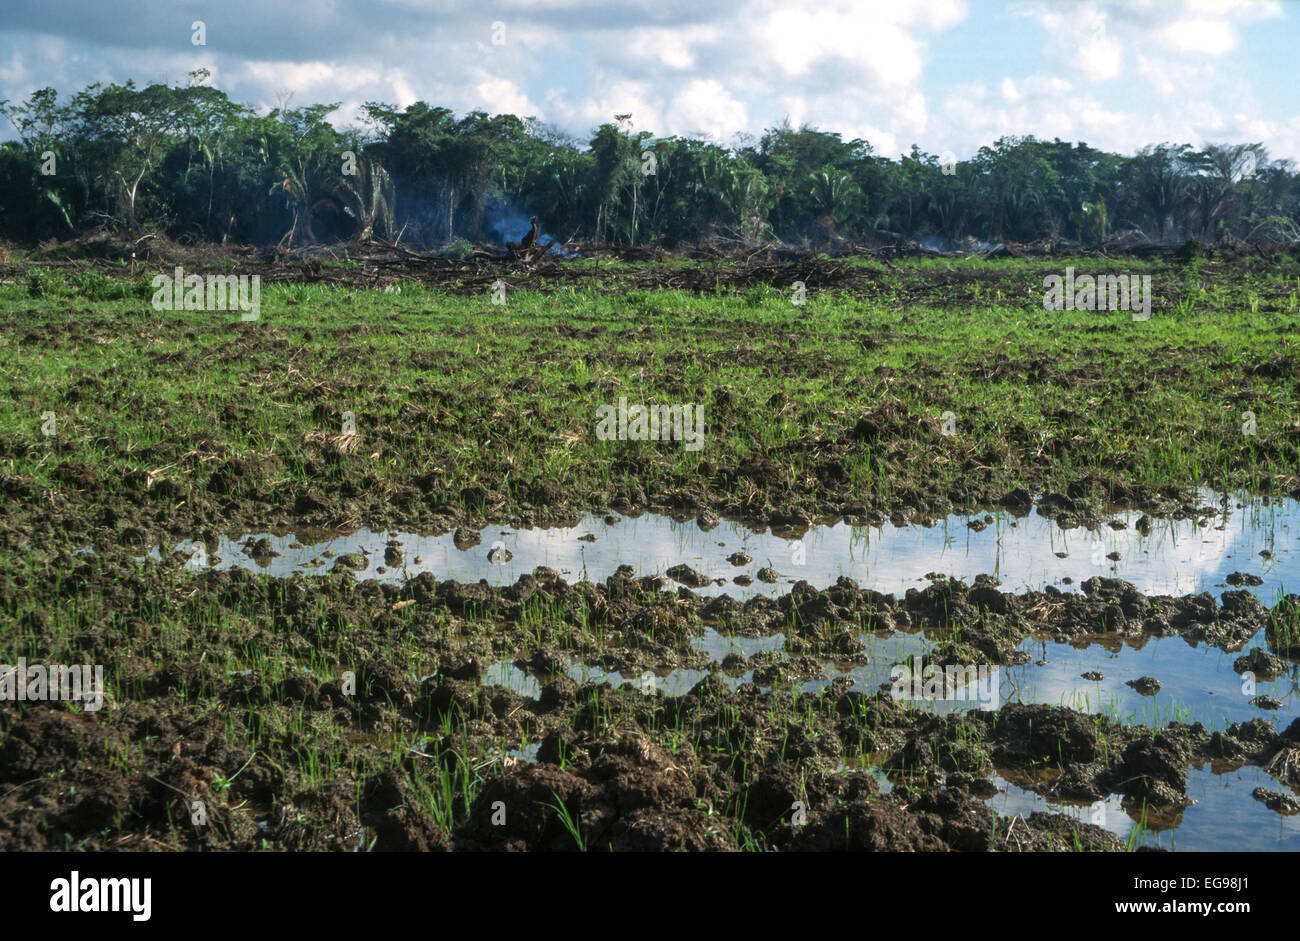 Tropical swamp forest recently cleared and burned for cultivation Stock Photo